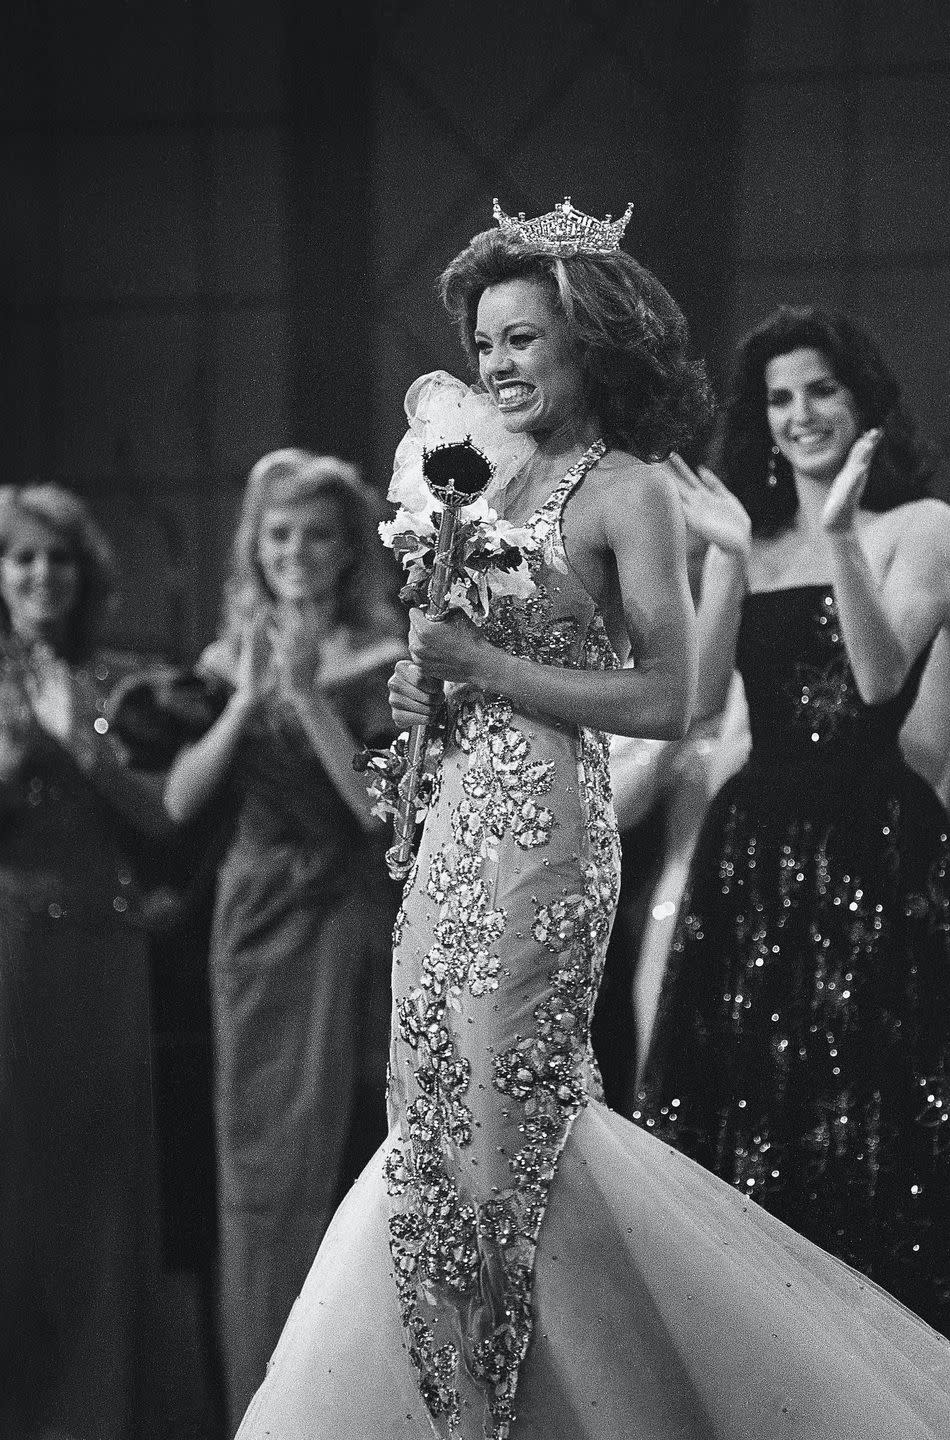 <p>A young Vanessa Williams not only looked flawless in this mermaid-style evening gown when she represented New York in 1984, but she also made history as the first African American woman to win the title. </p>